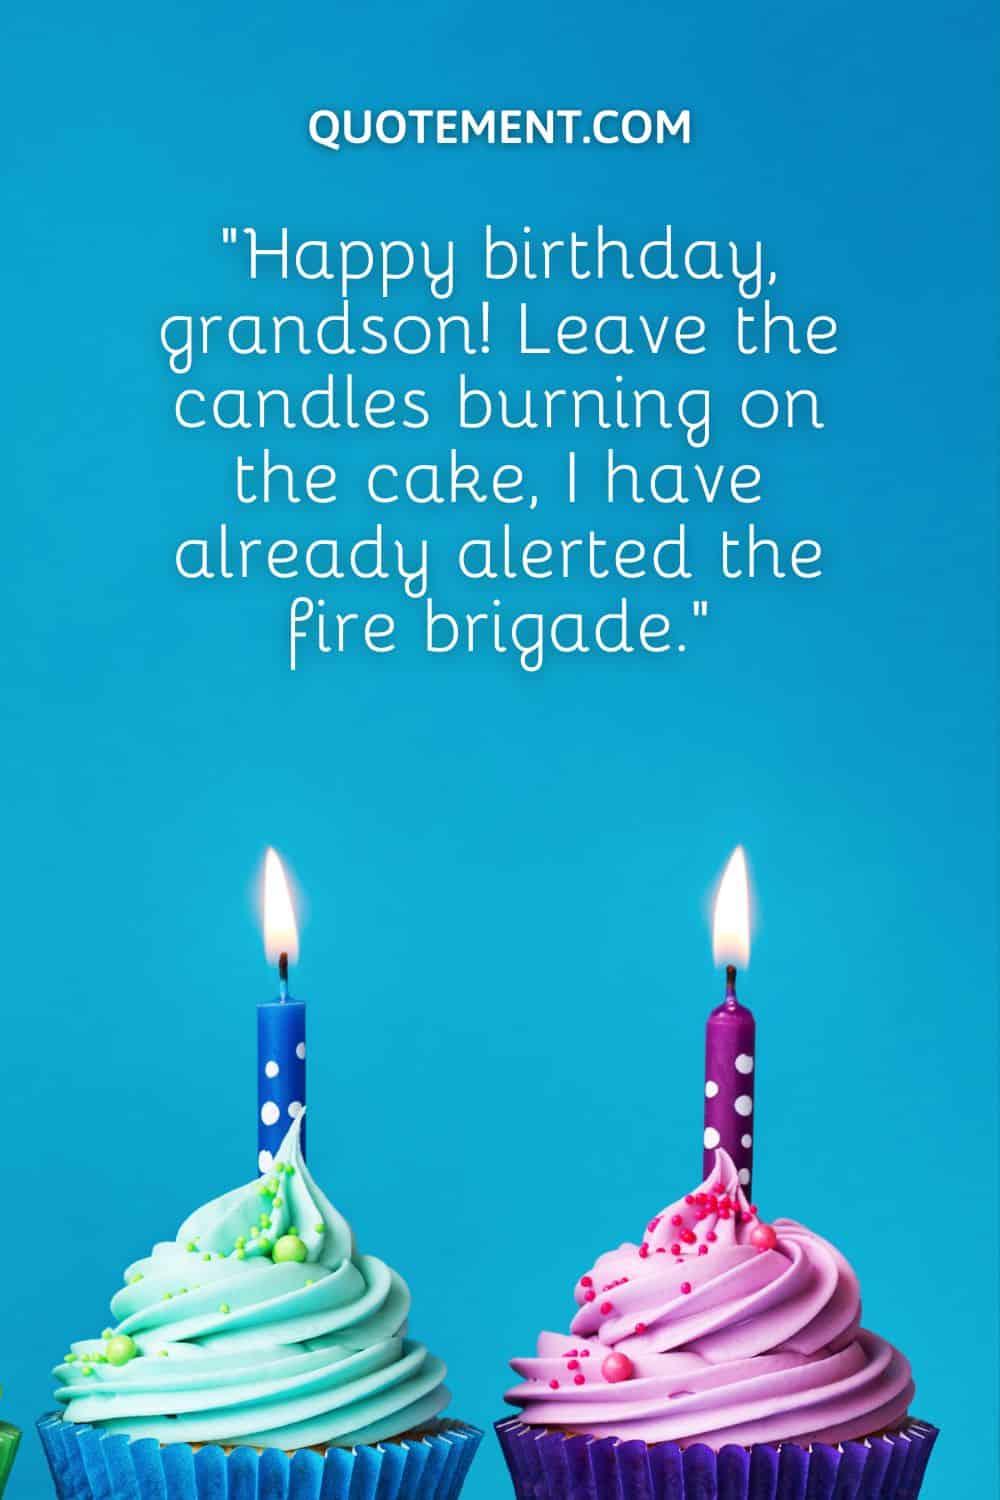 “Happy birthday, grandson! Leave the candles burning on the cake, I have already alerted the fire brigade.”